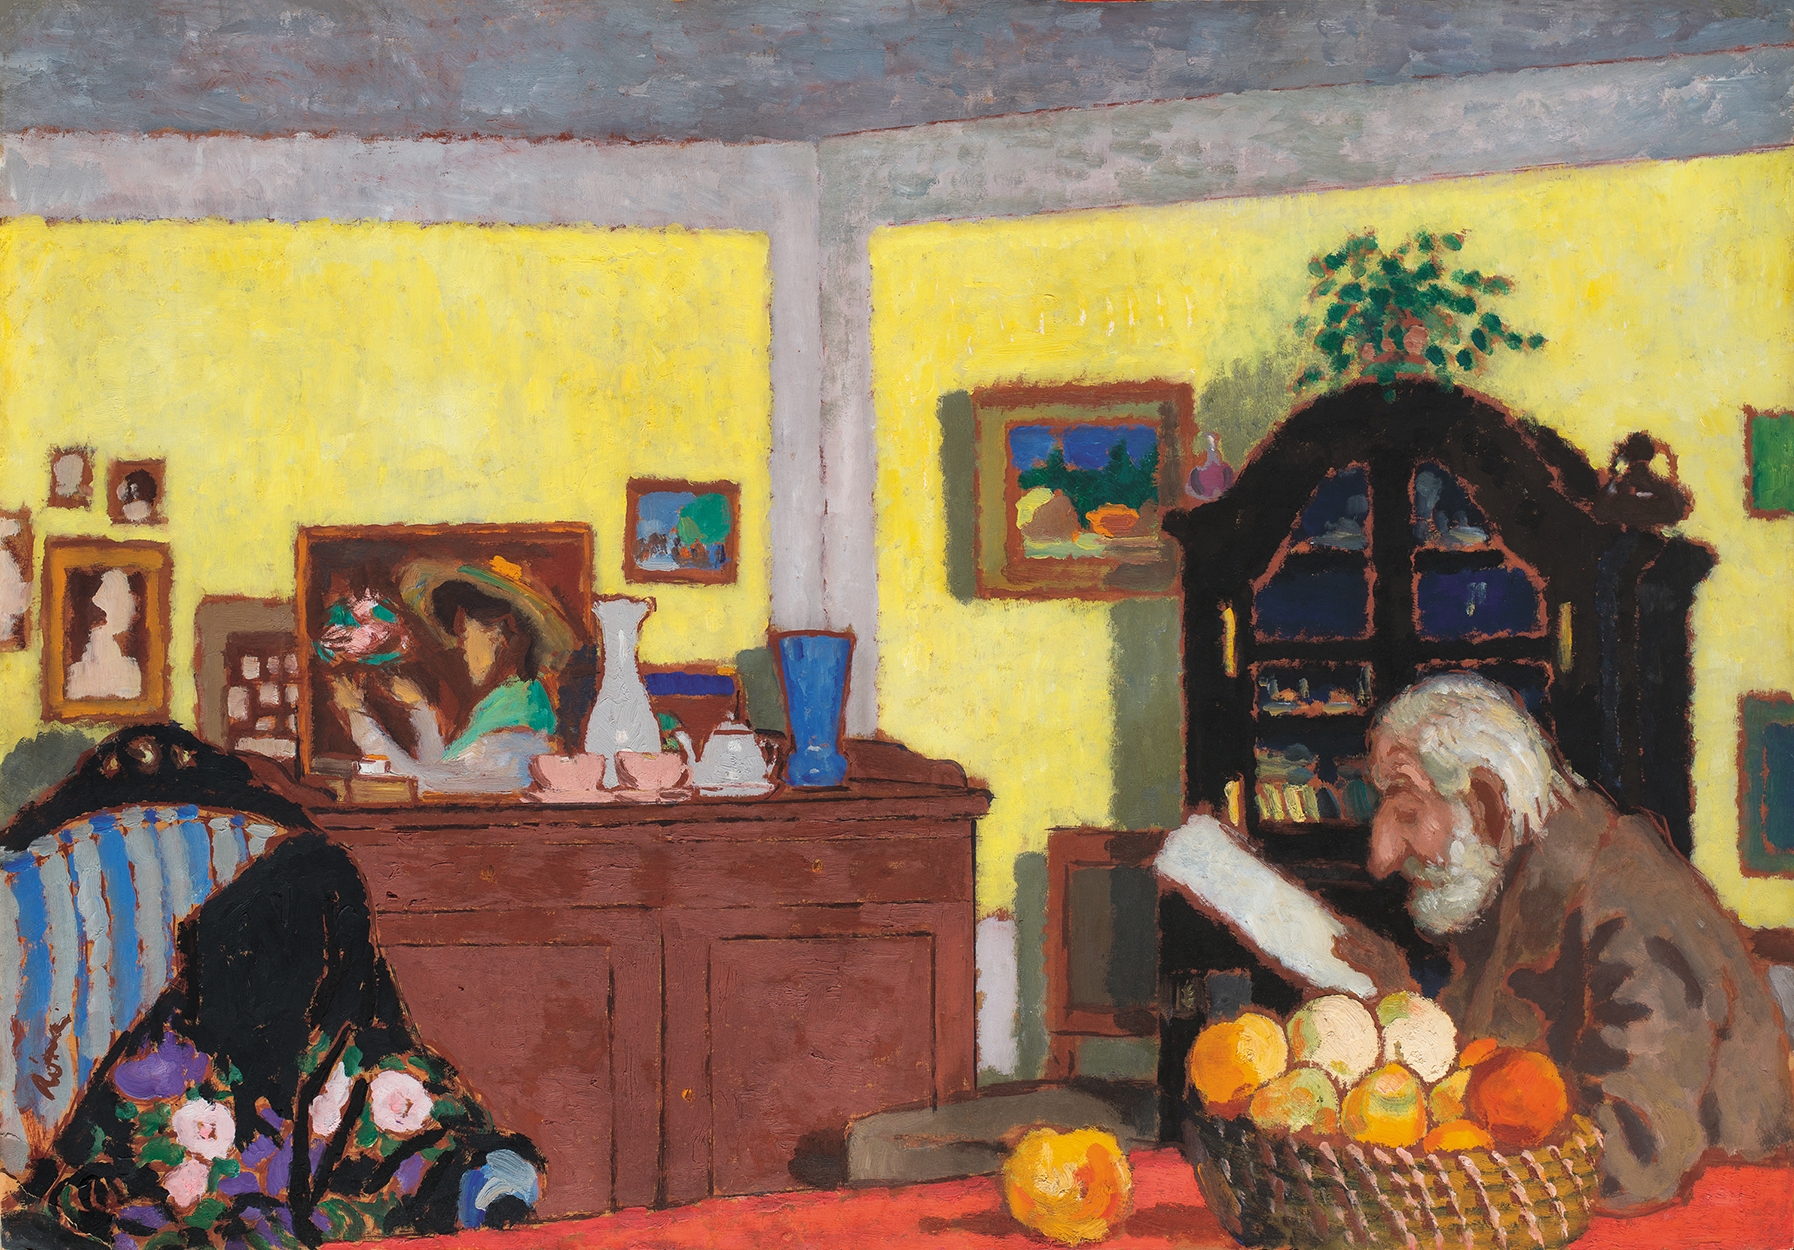 Rippl-Rónai József (1861-1927) Uncle Piacsek in front of the Black Sideboard, 1907